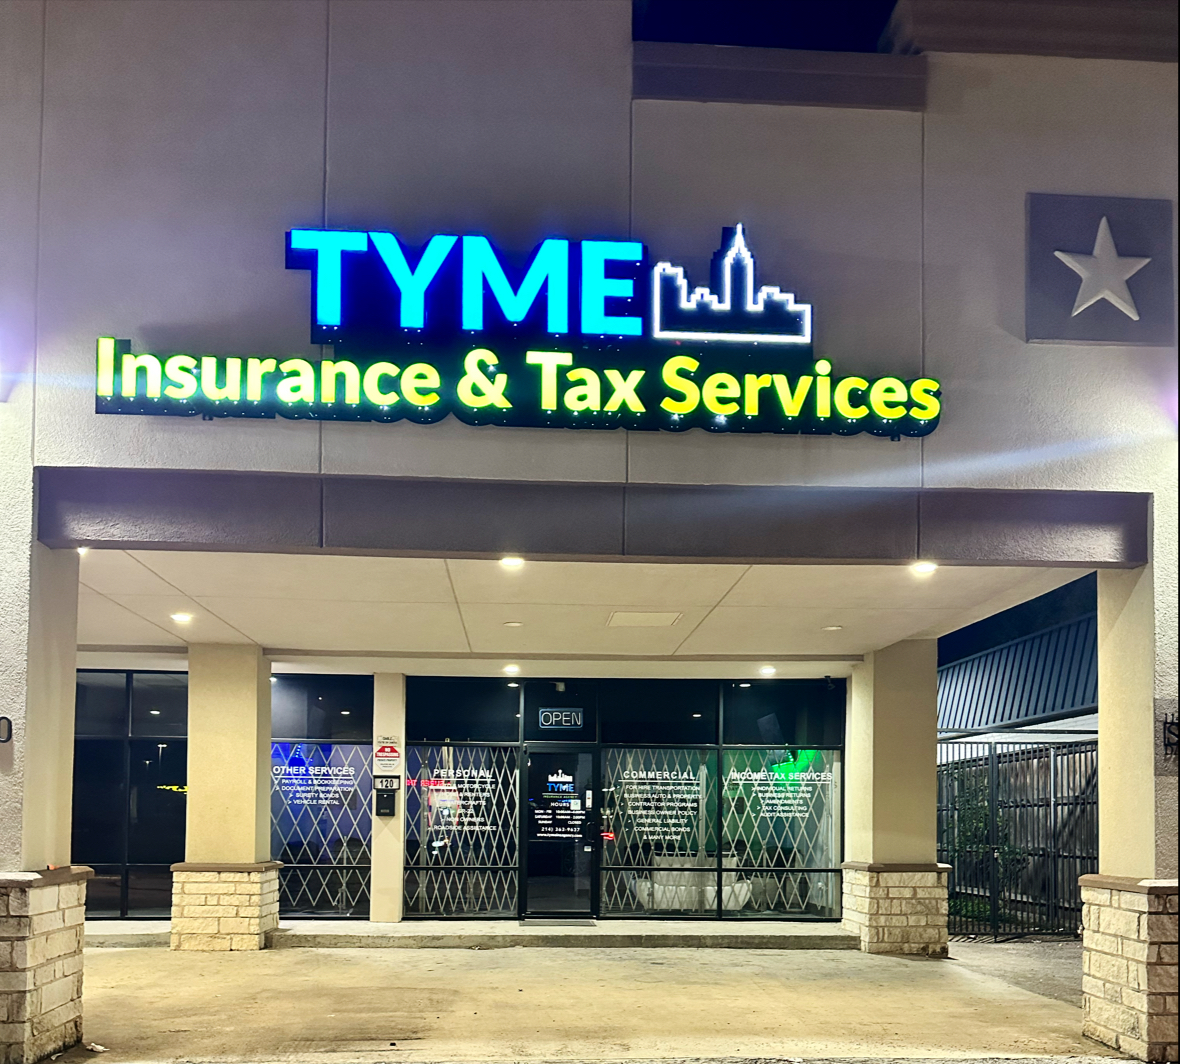 Tyme Insurance & Tax Services